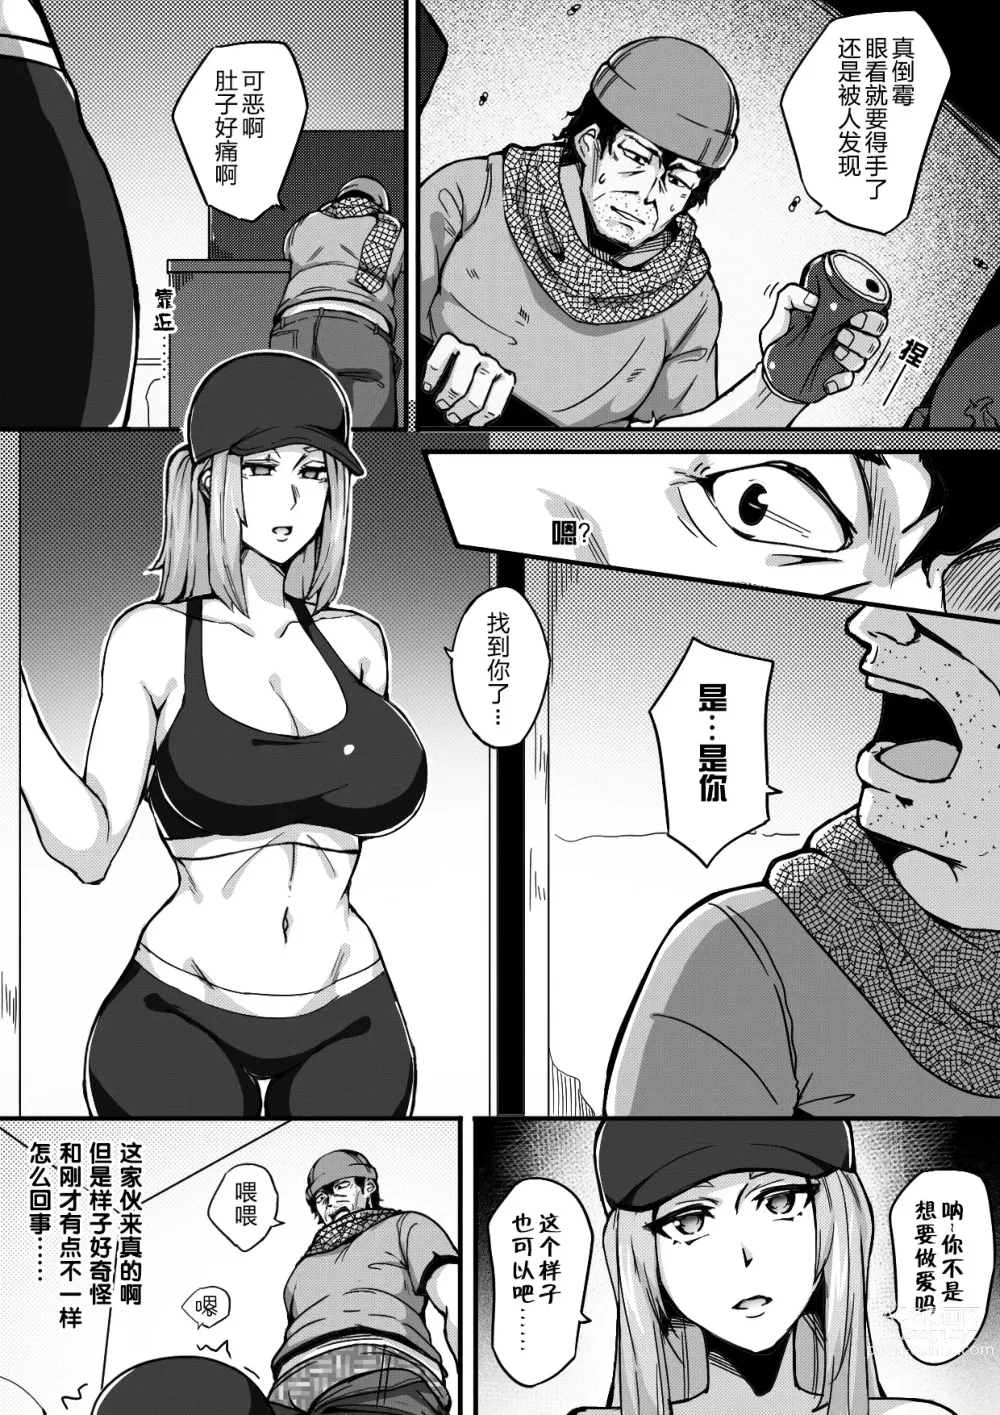 Page 13 of doujinshi Live Meat 5